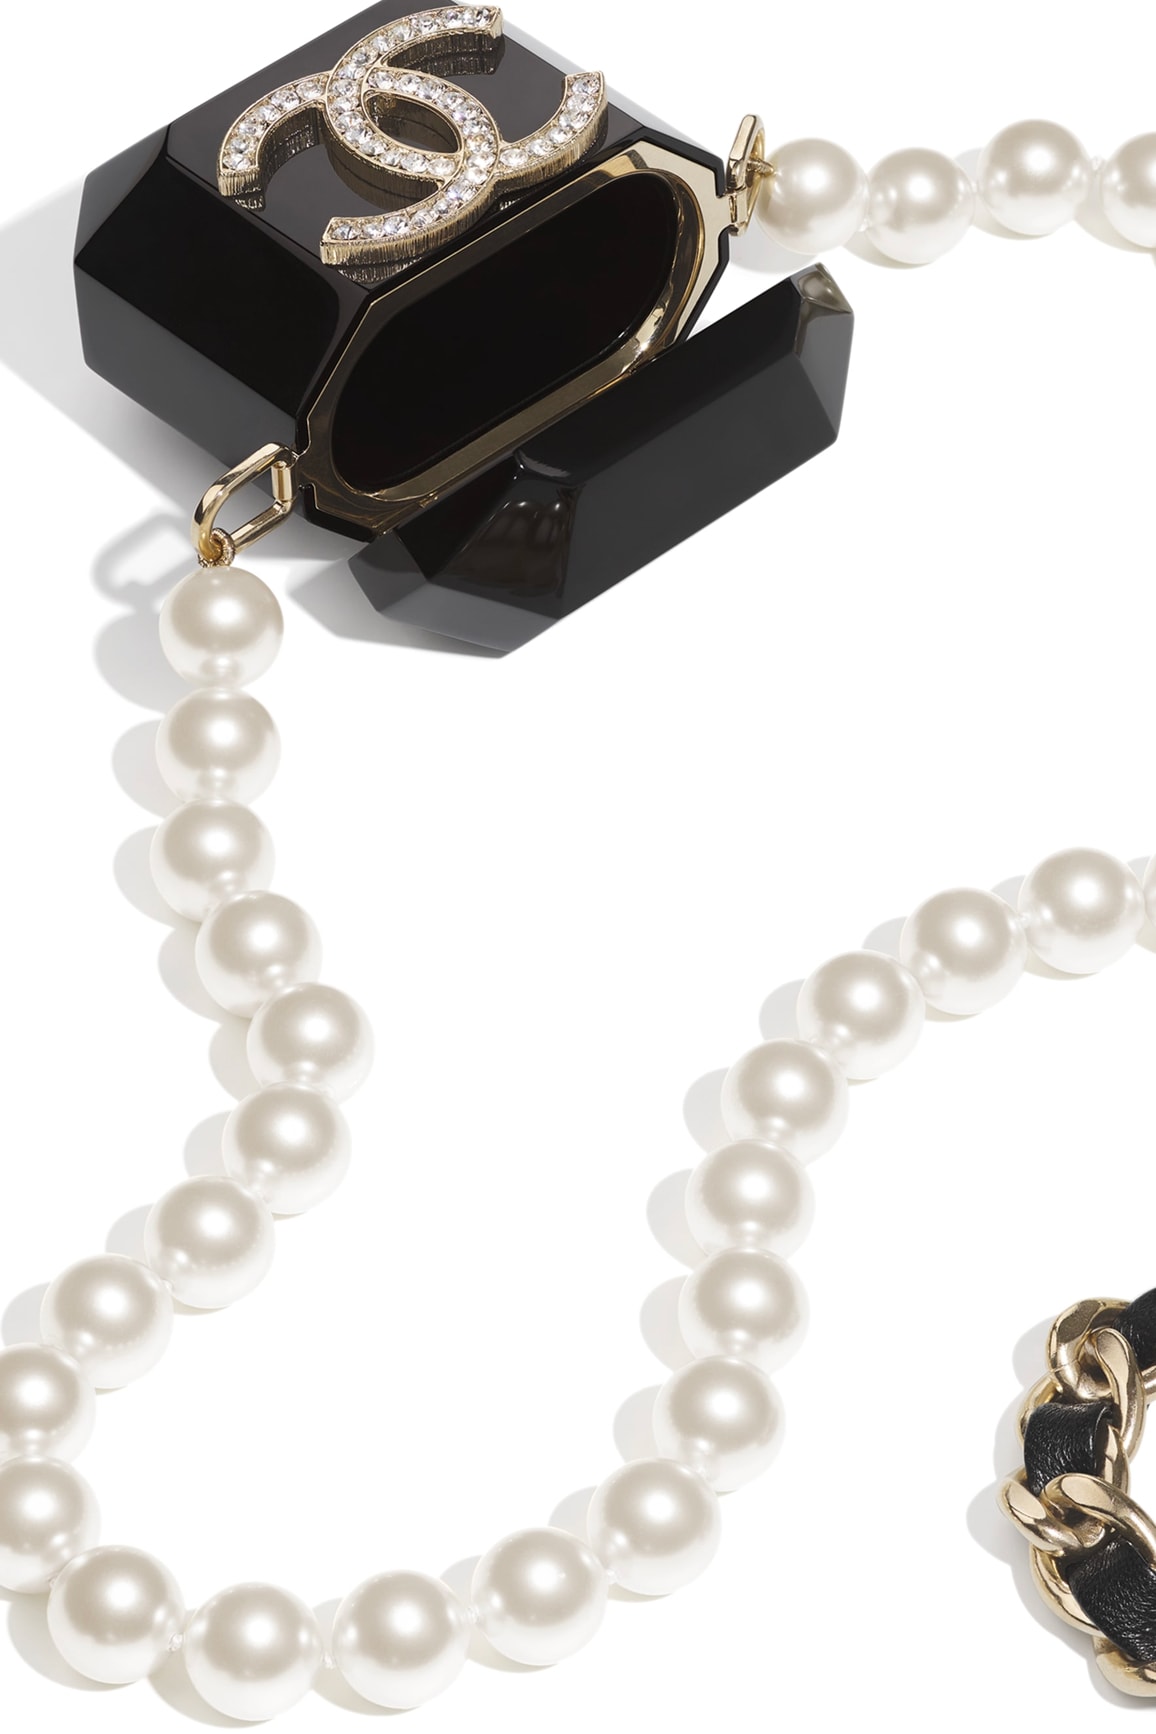 Chanel pearl crystal Airpods Case Necklace AB6678 B06190 ND333 diamante accessories pearls leather handbags luxury necklace